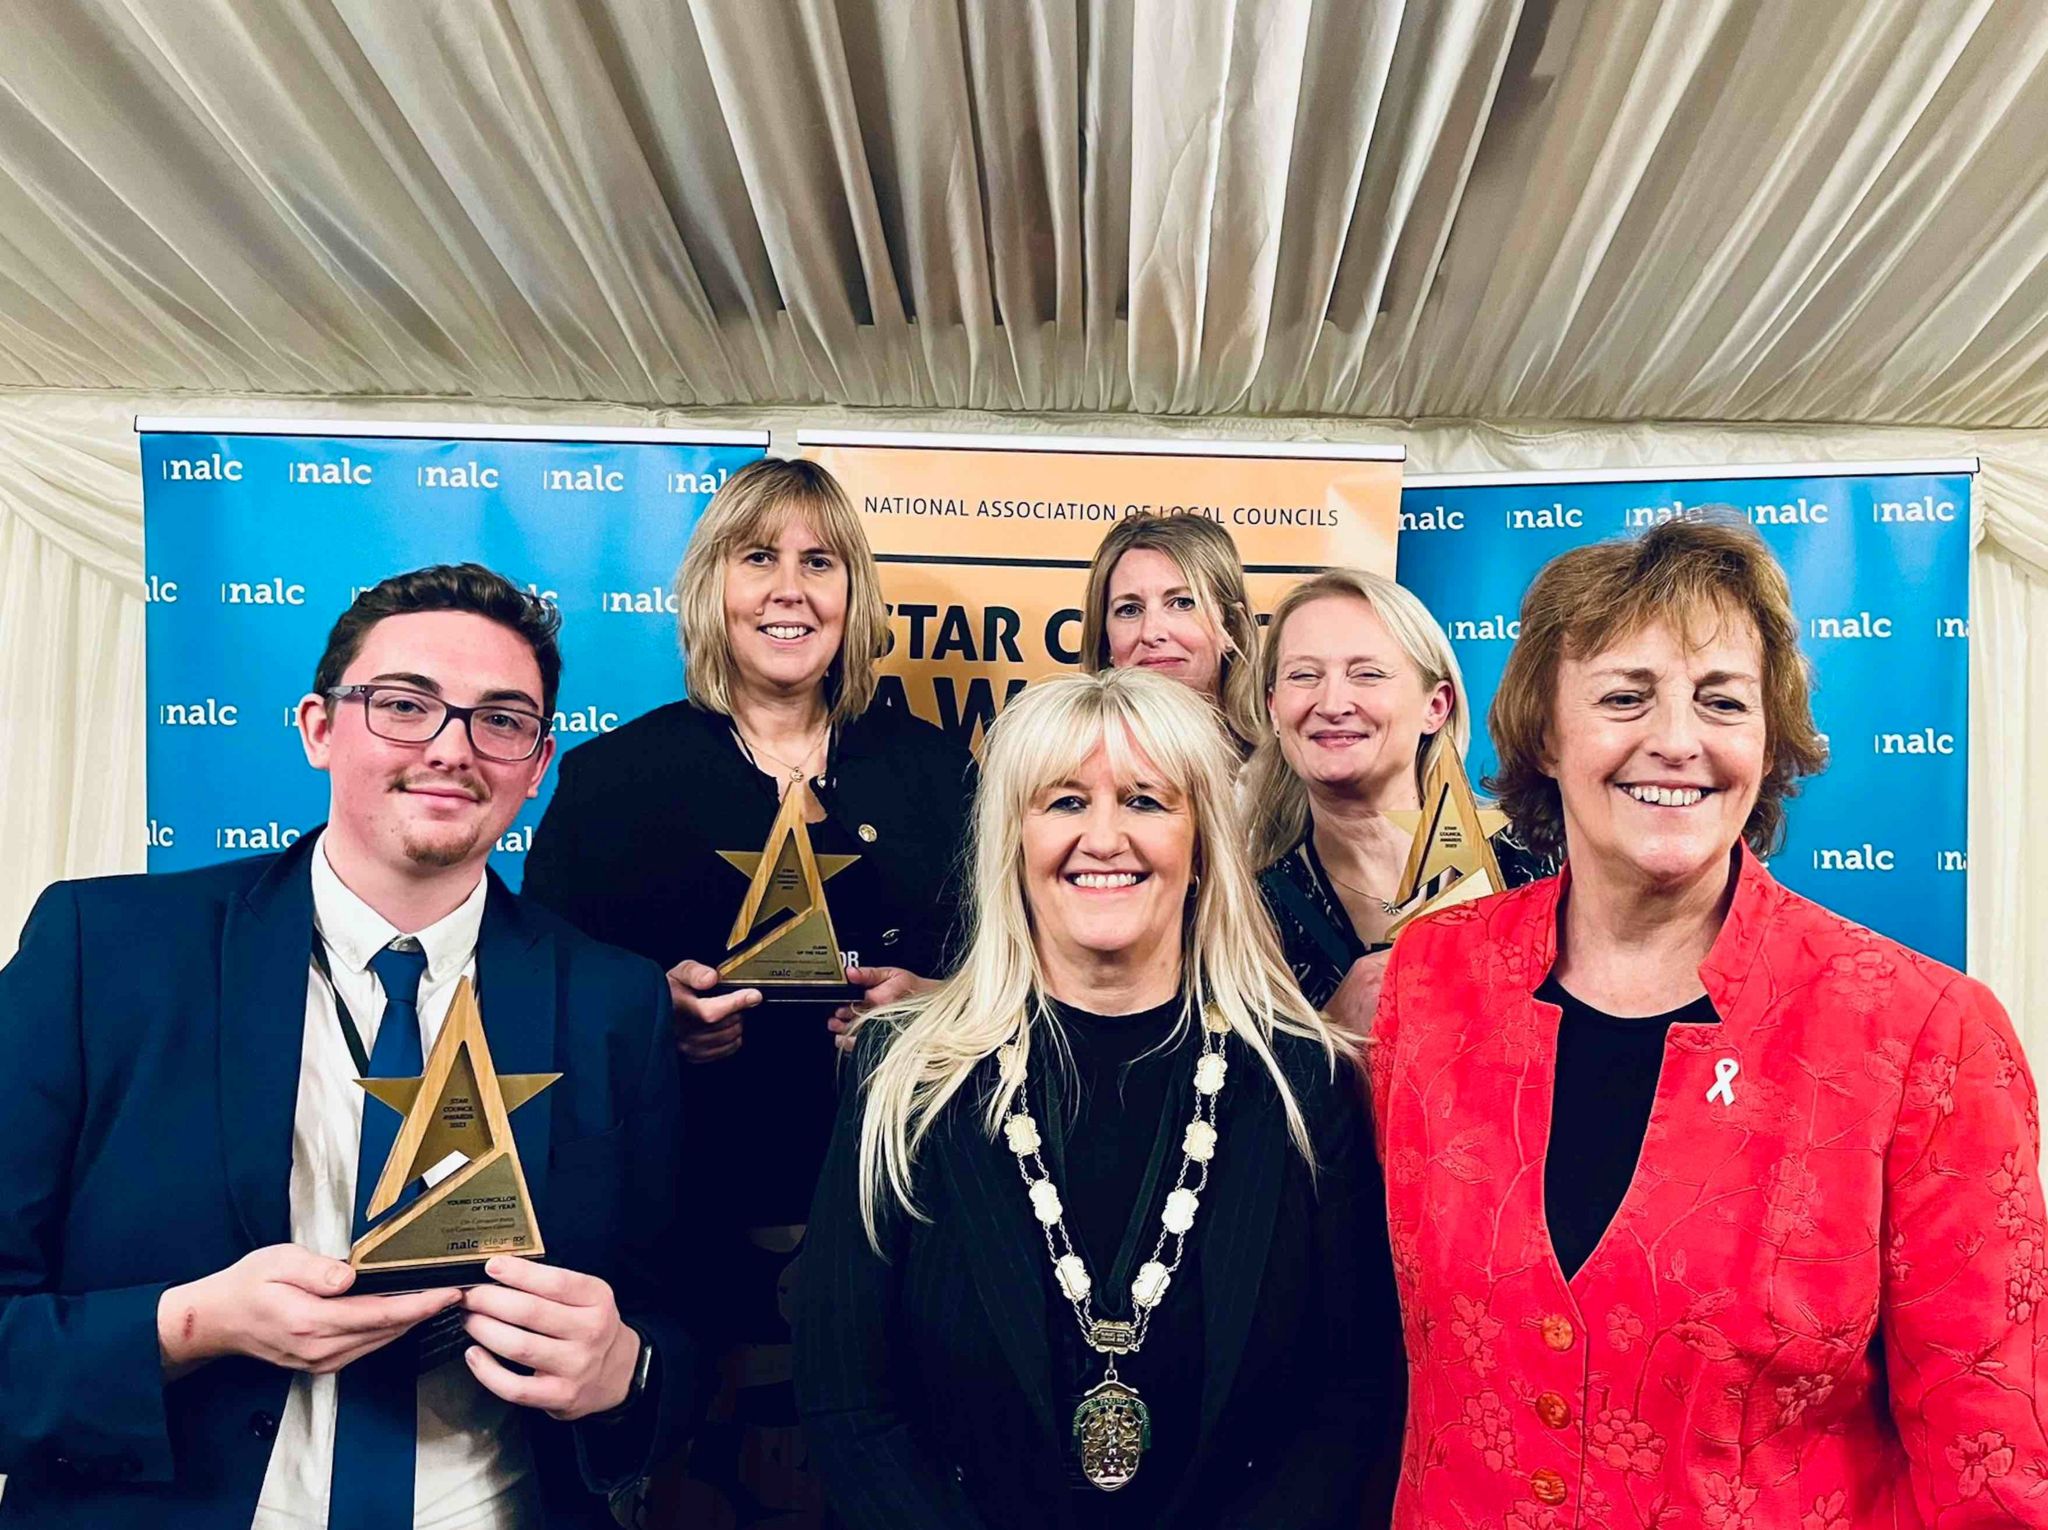 All the winners of the Star Council Awards